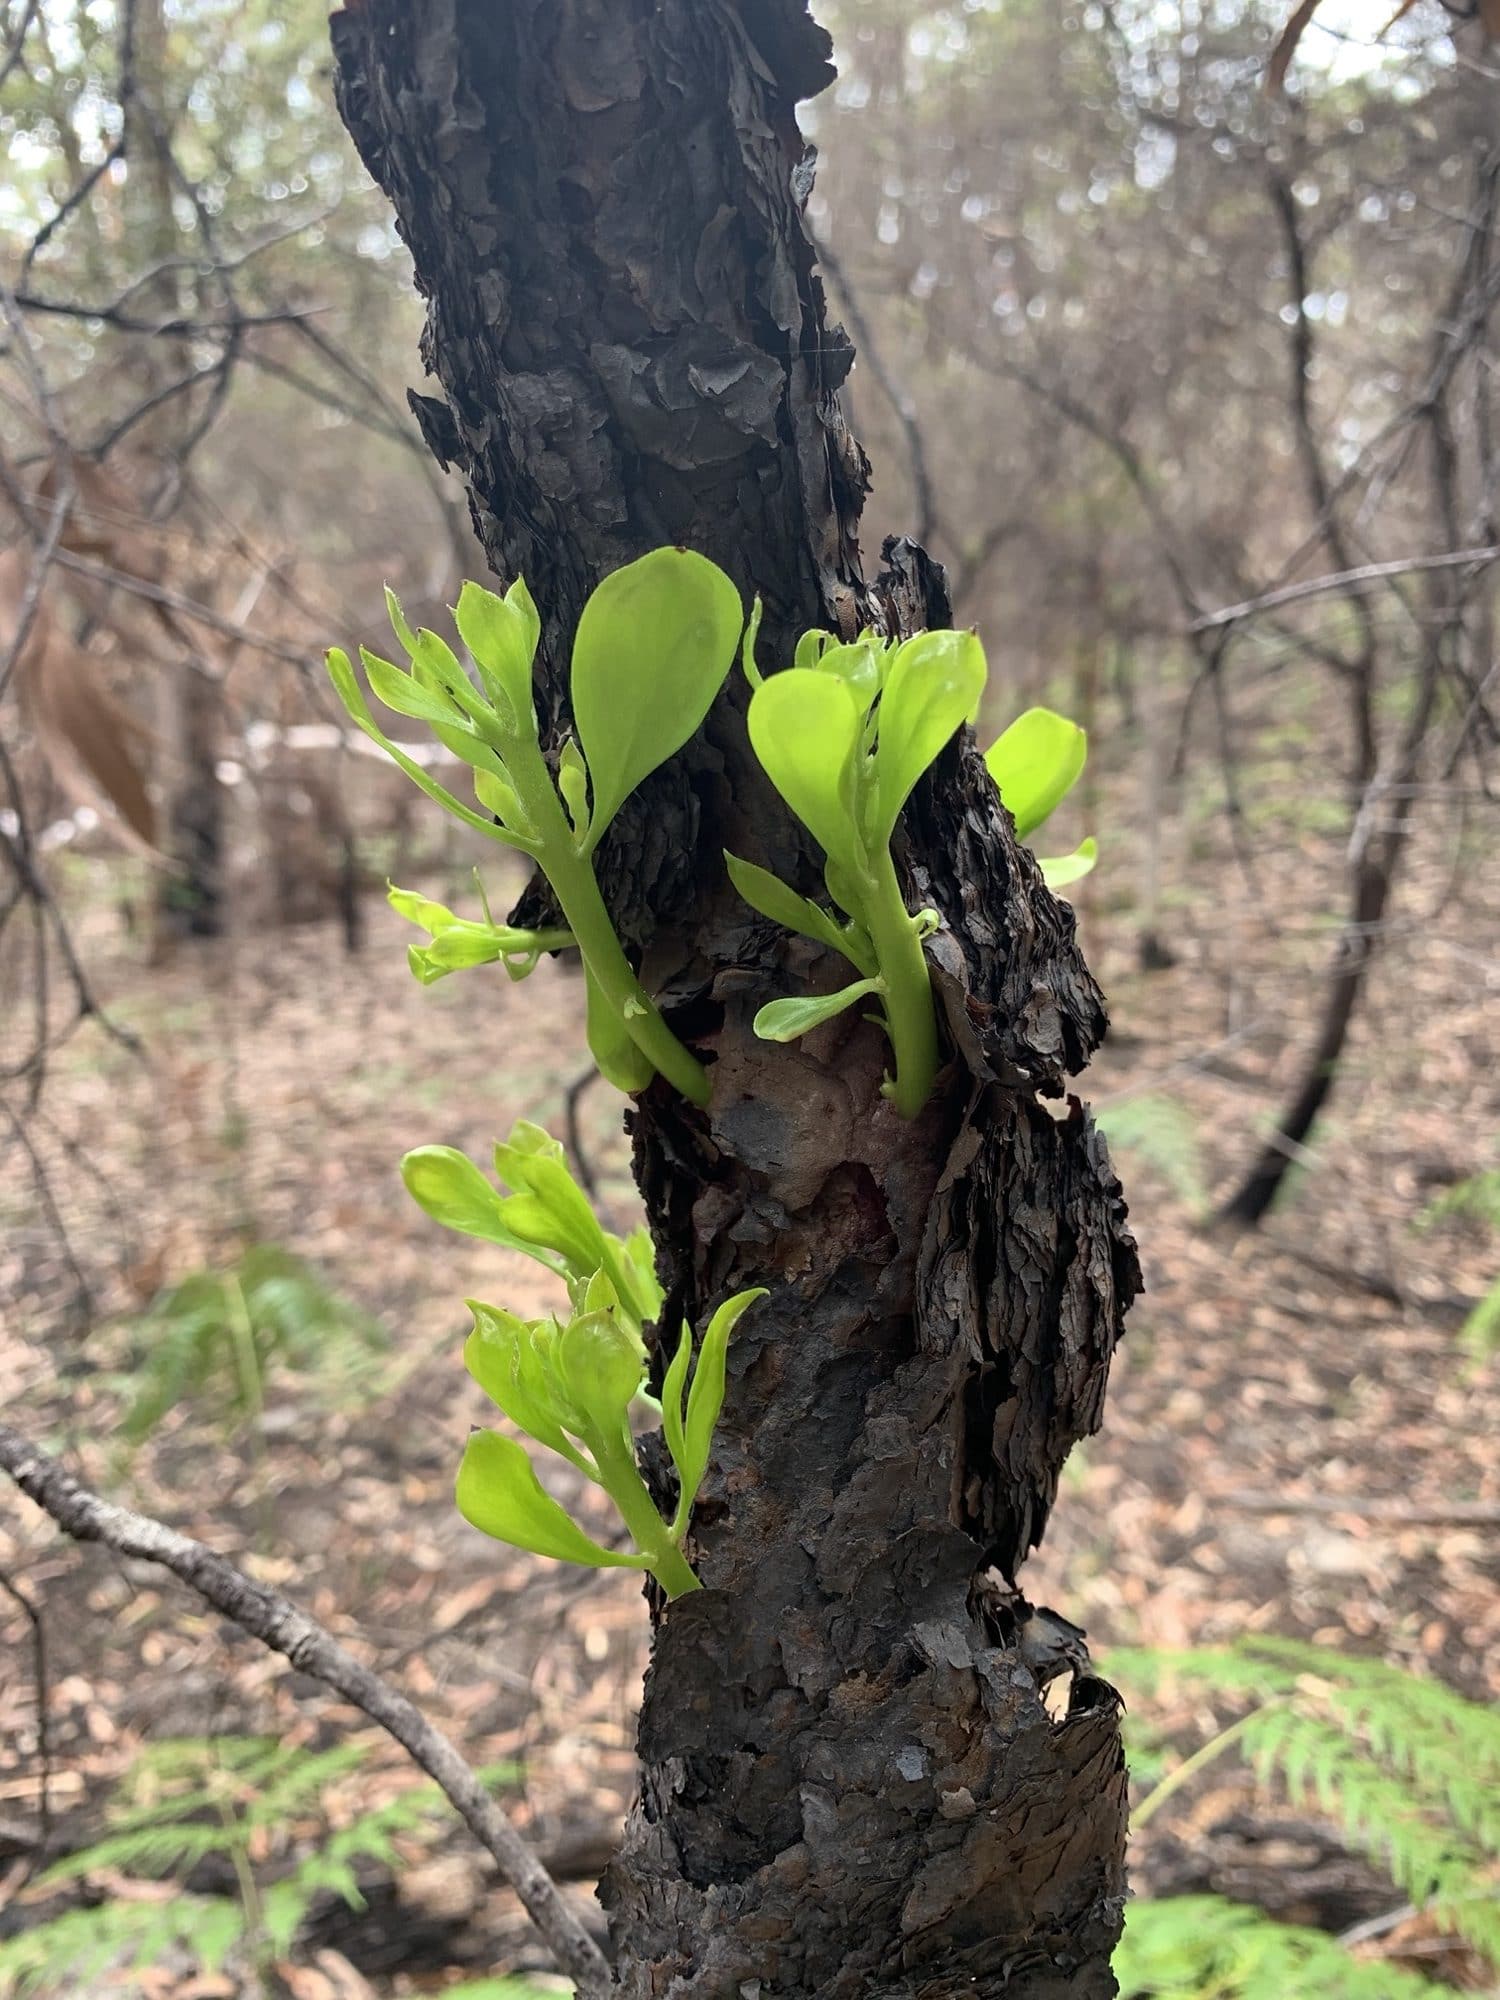 Epicormic growth (type or resprouting) after bushfire . Photo credit Isabelle Strachan